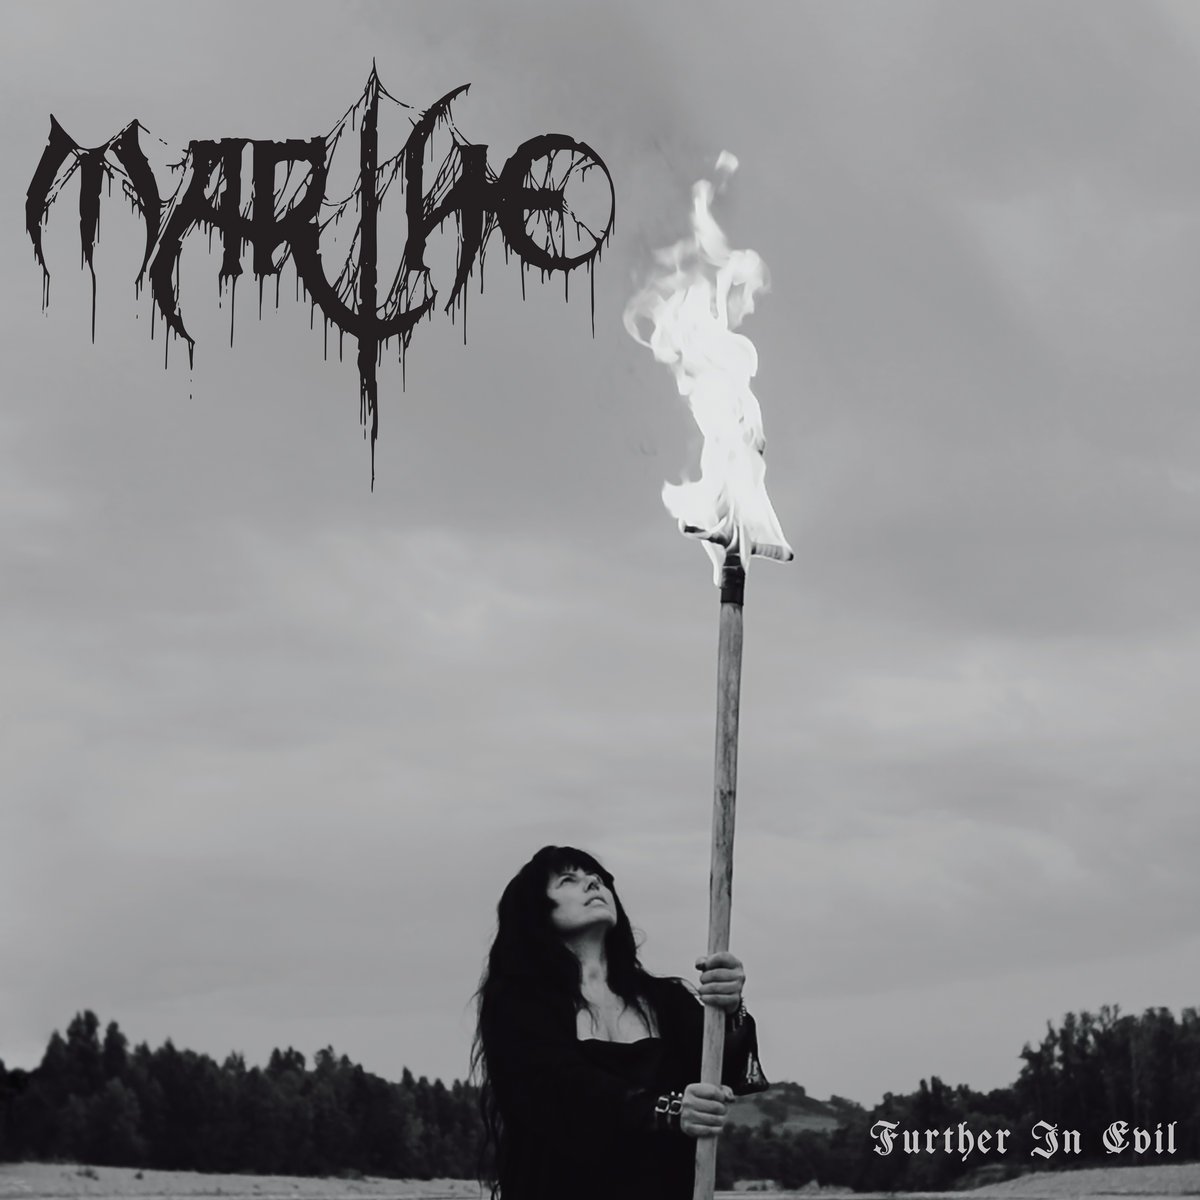 Marthe – “Further in Evil”